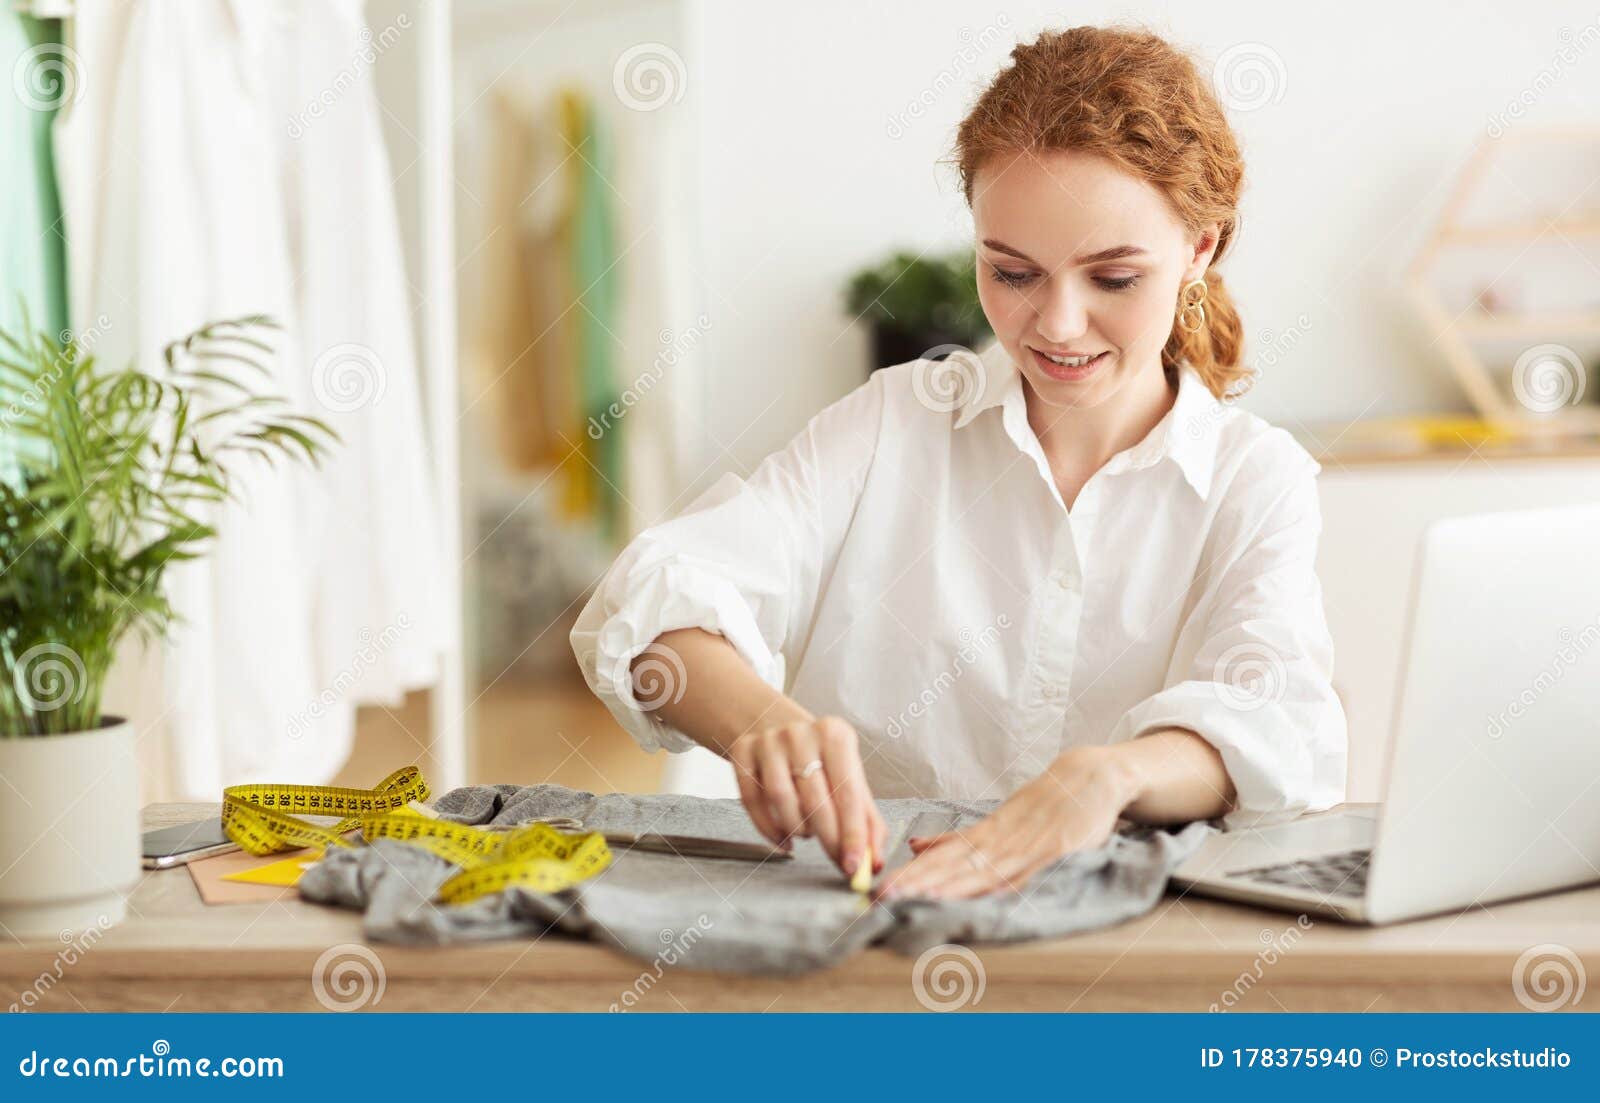 Woman is Drawing Patterns with Soap or Chalk on Cloth Stock Photo ...